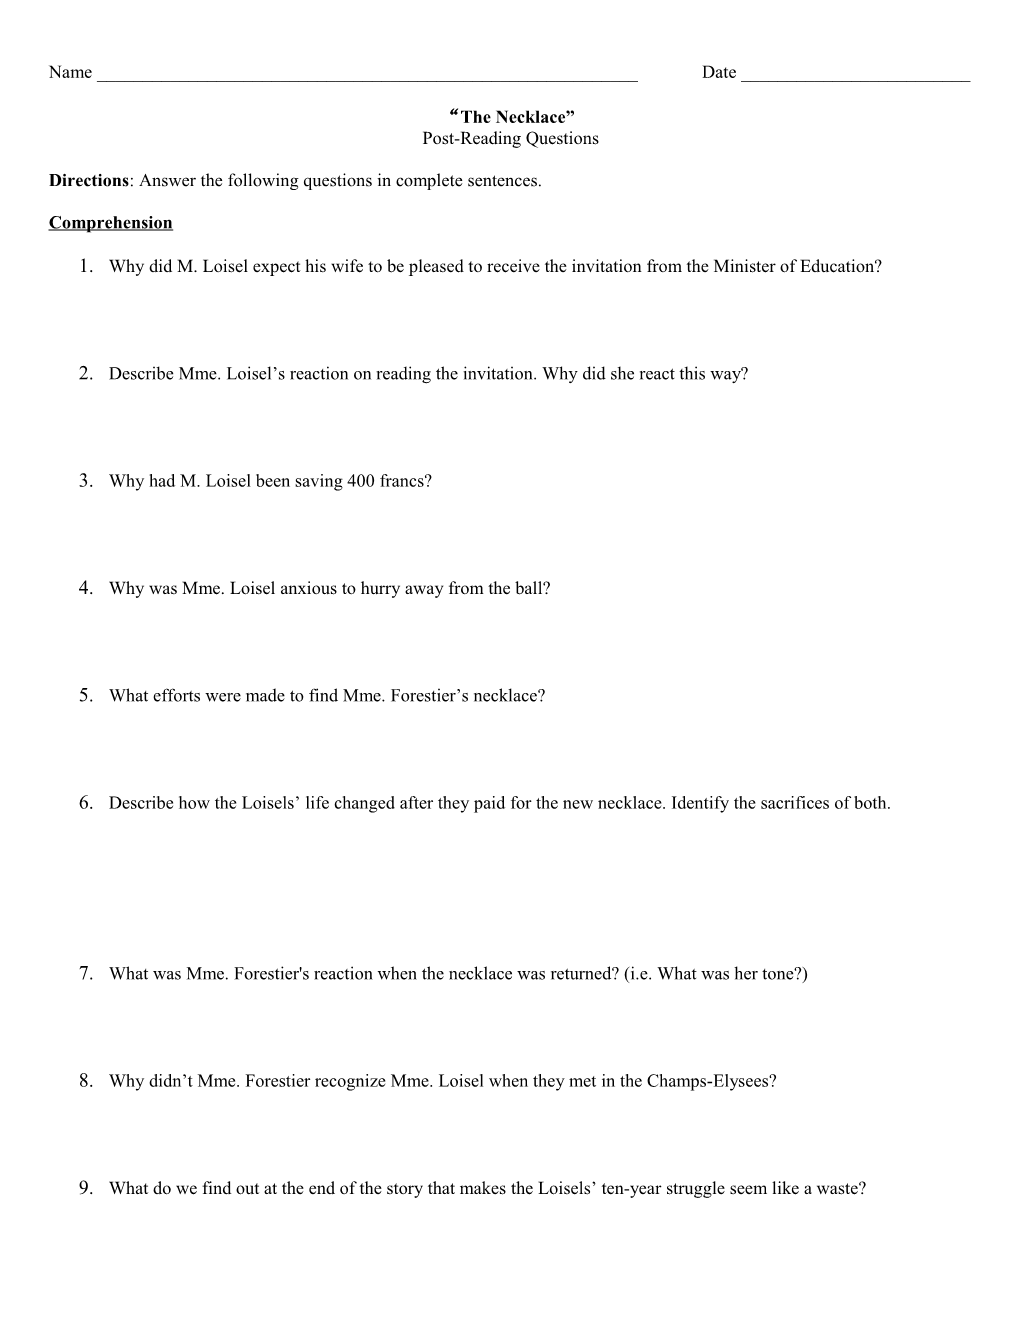 Directions: Answer the Following Questions in Complete Sentences s1